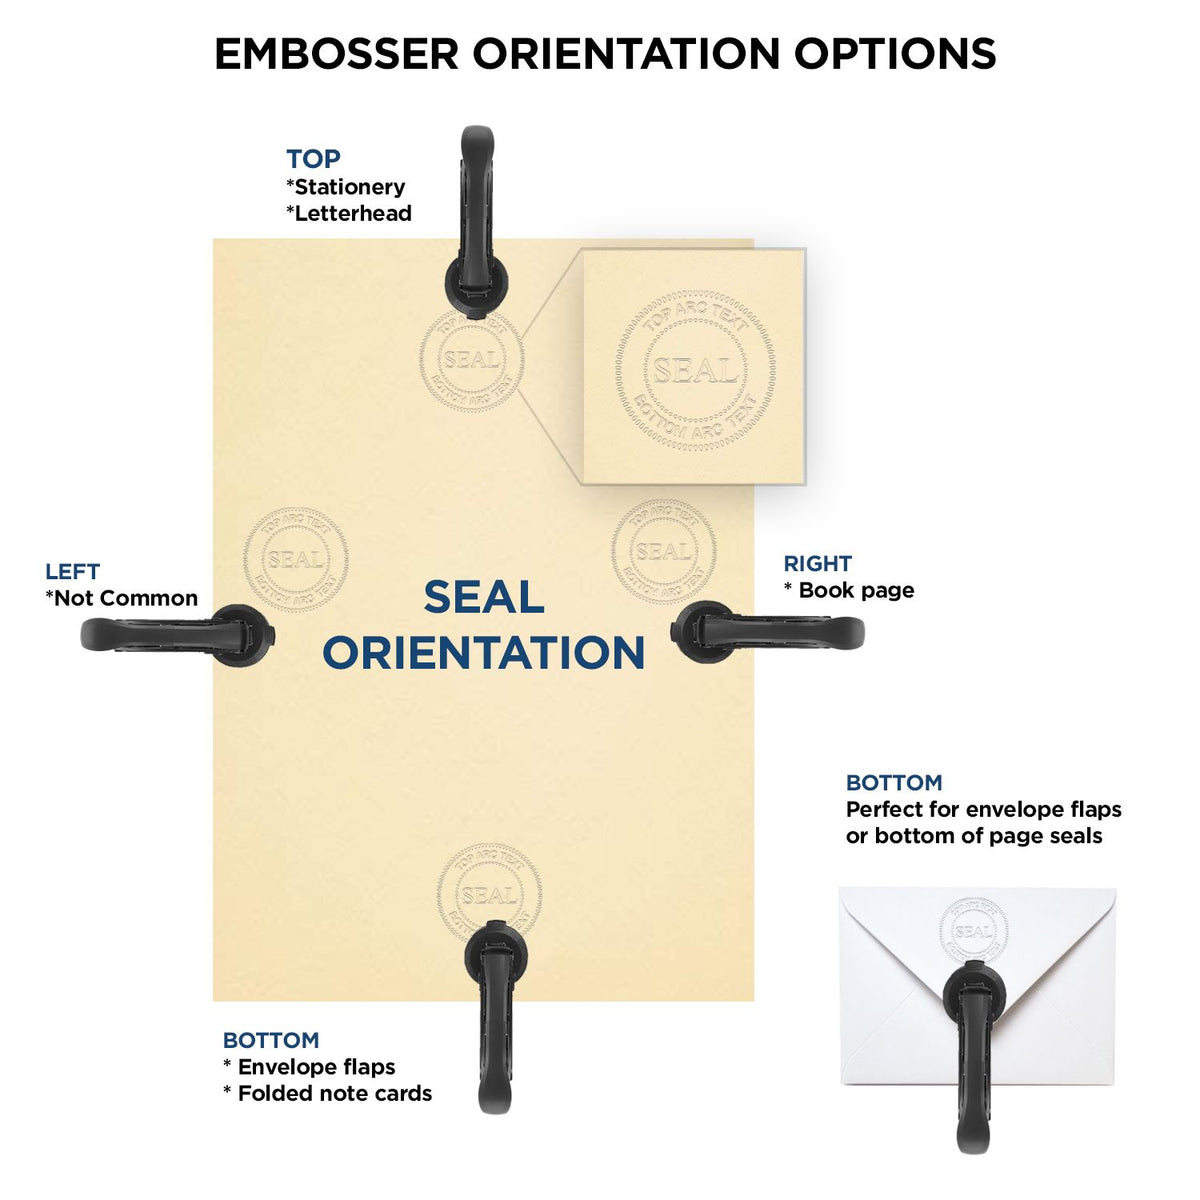 An infographic for the State of Minnesota Soft Land Surveyor Embossing Seal showing embosser orientation, this is showing examples of a top, bottom, right and left insert.